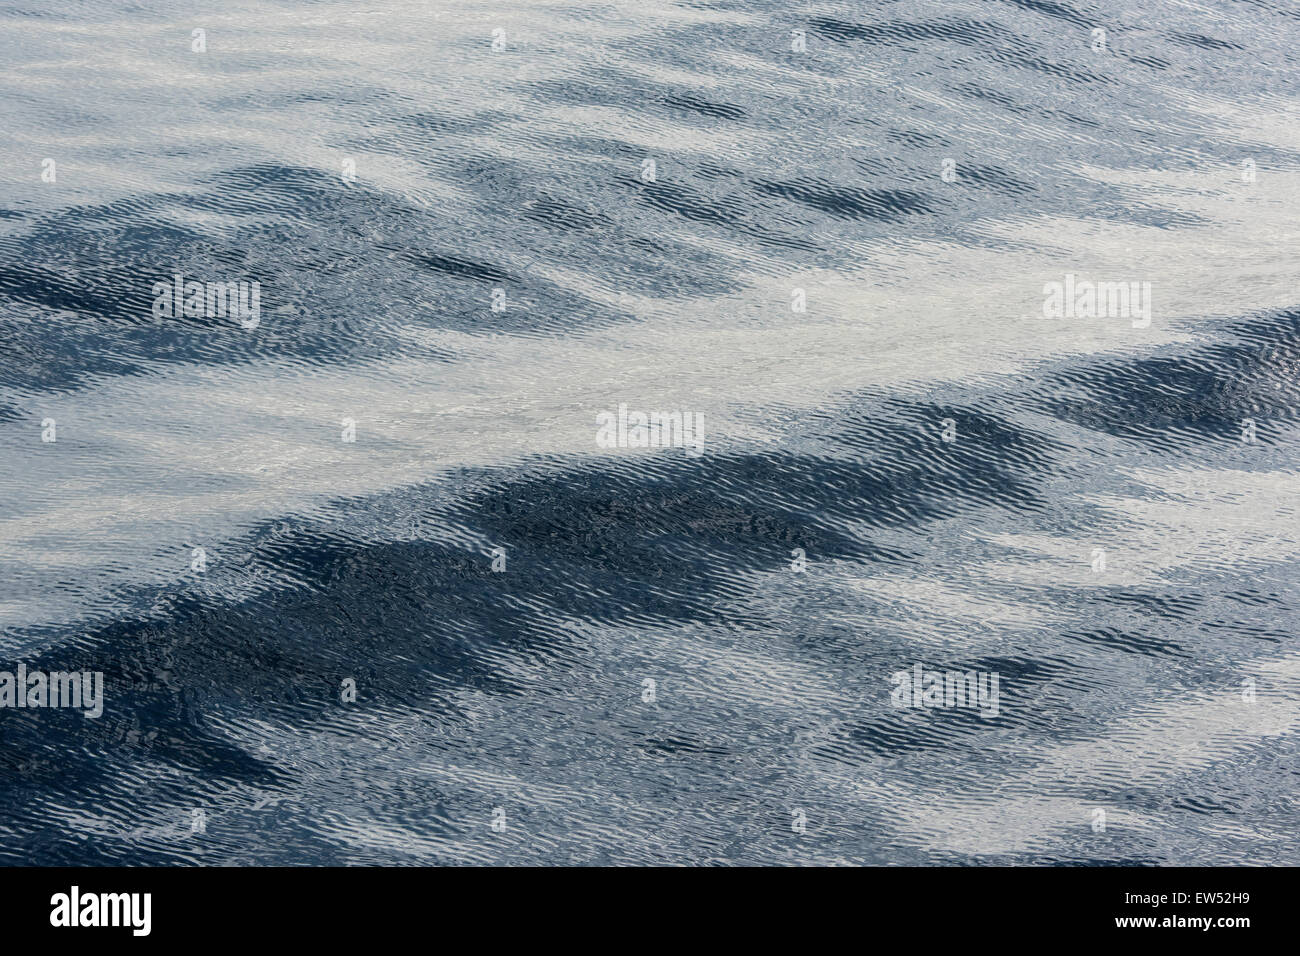 Ripples, surface of the sea, Denmark Strait, Greenland Stock Photo